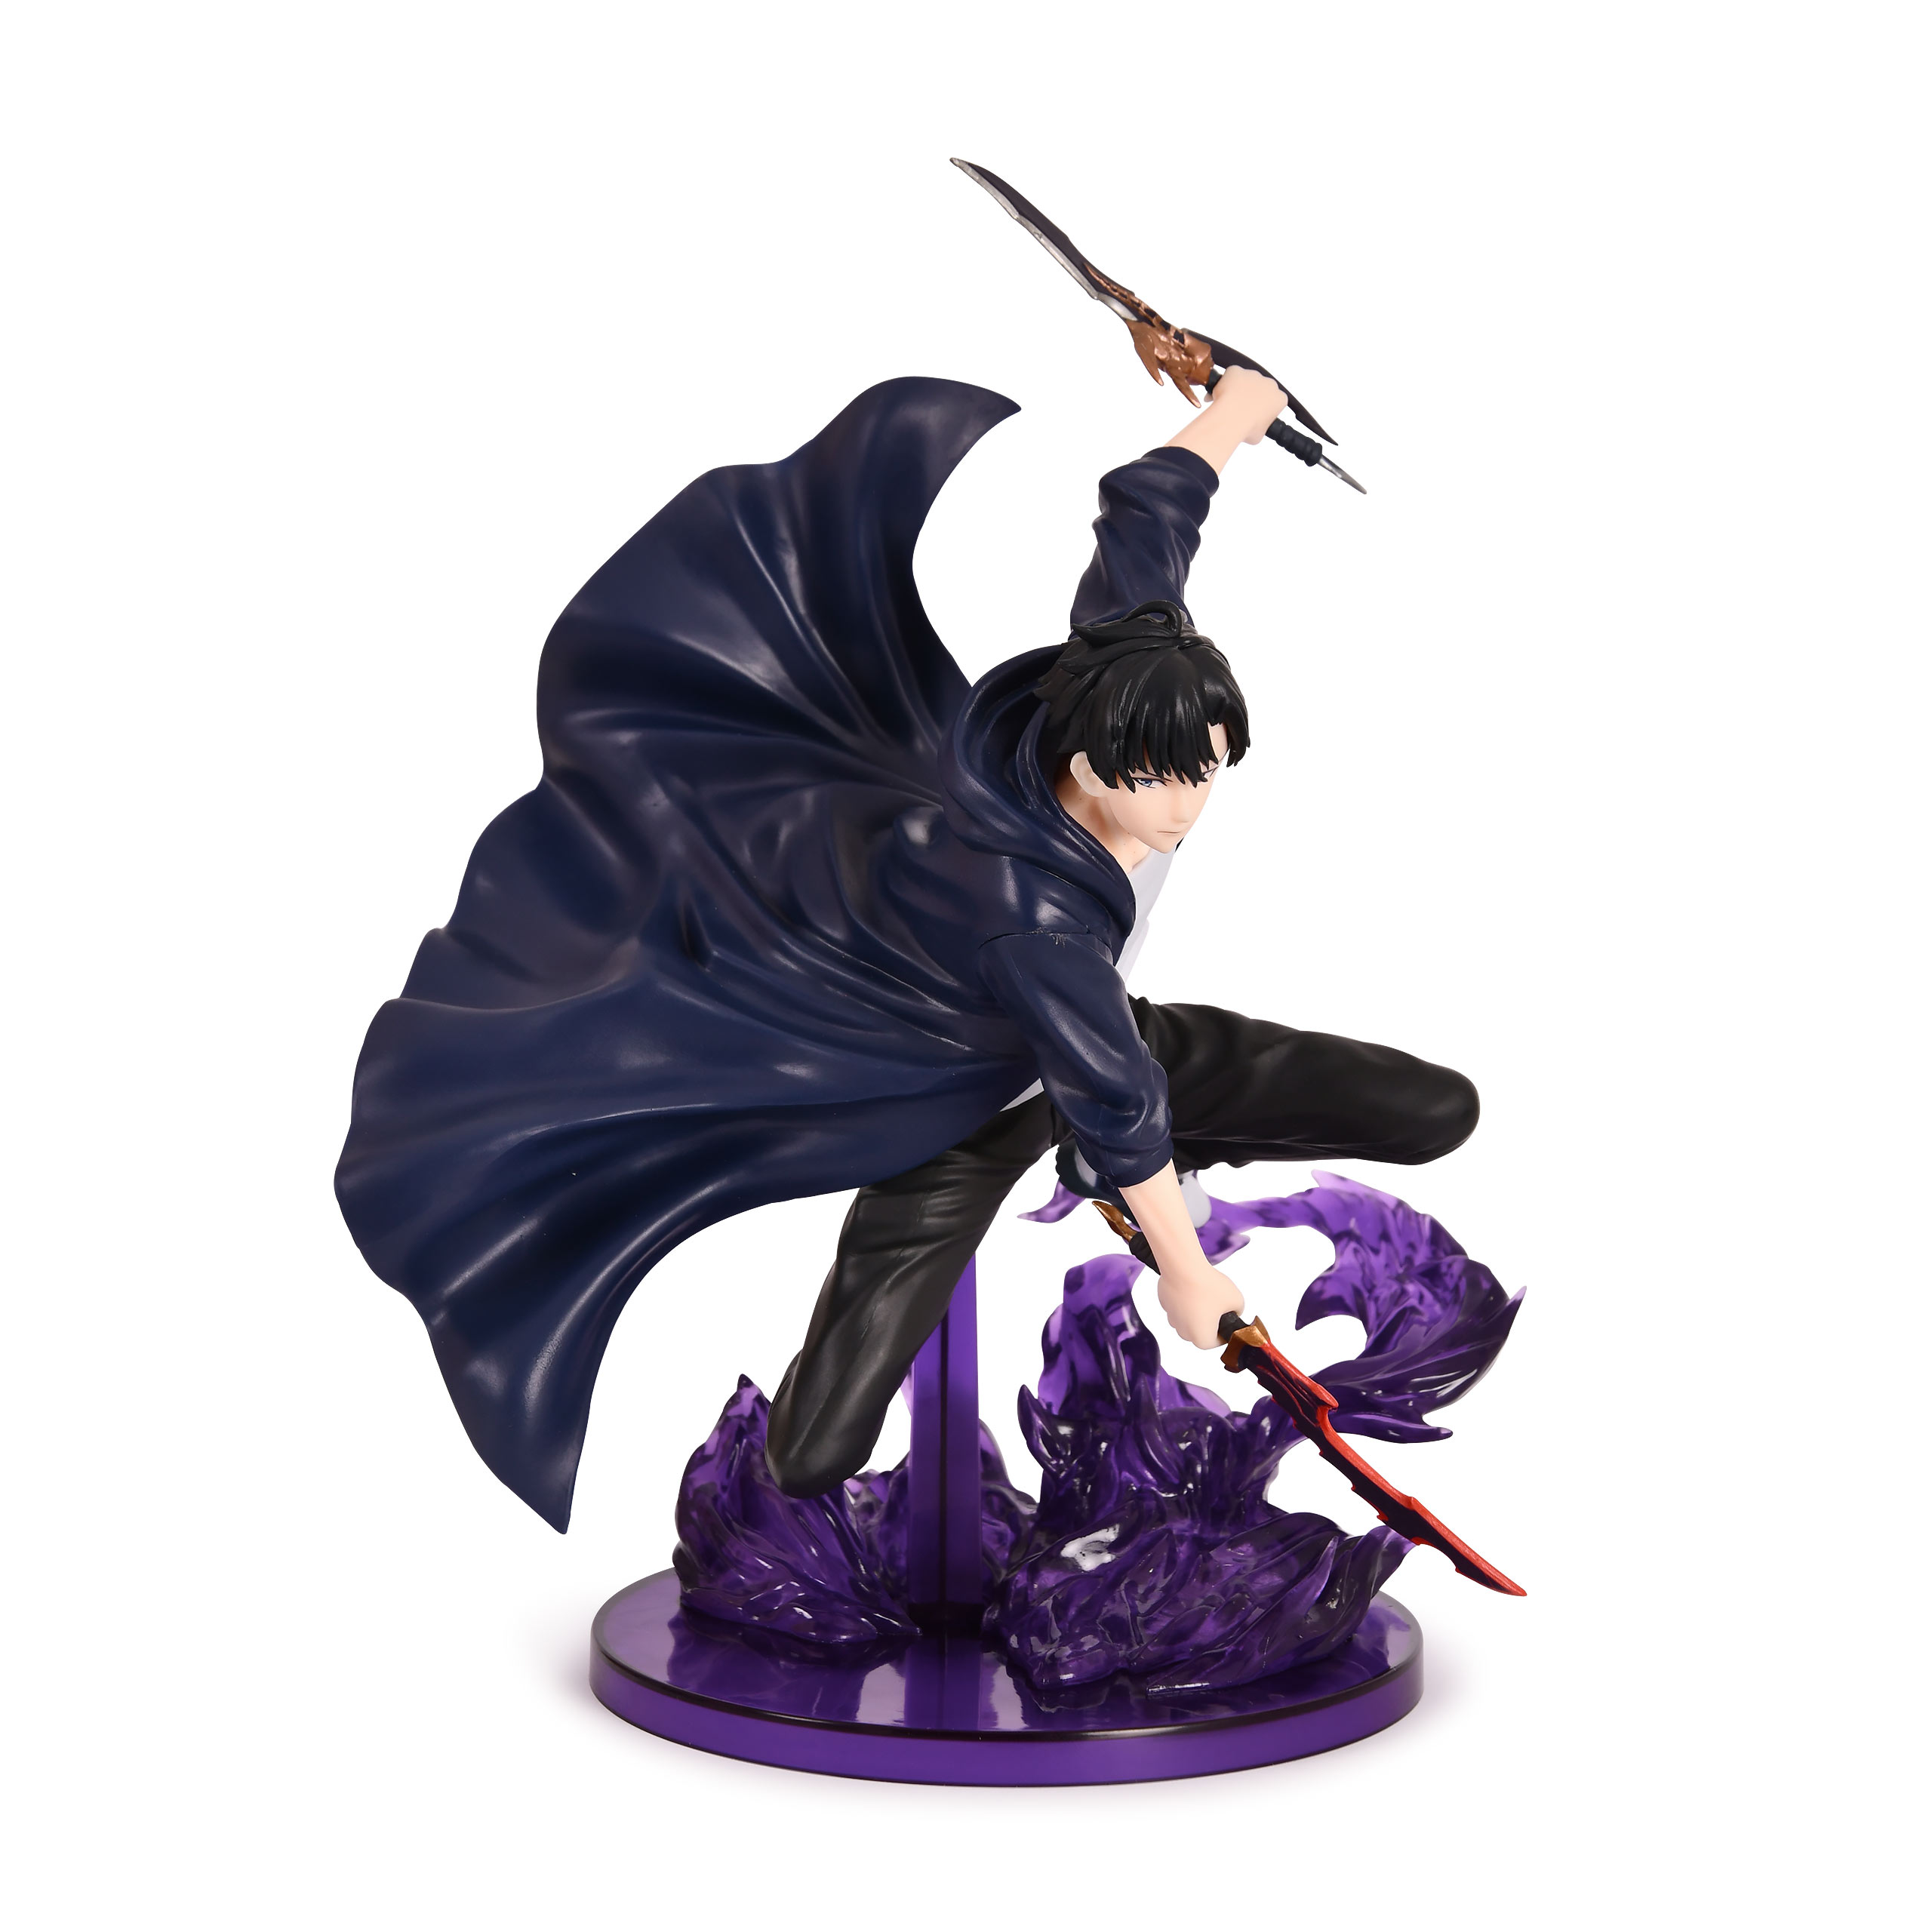 Solo Leveling - Figurine Excite Motions de Sung Jinwoo